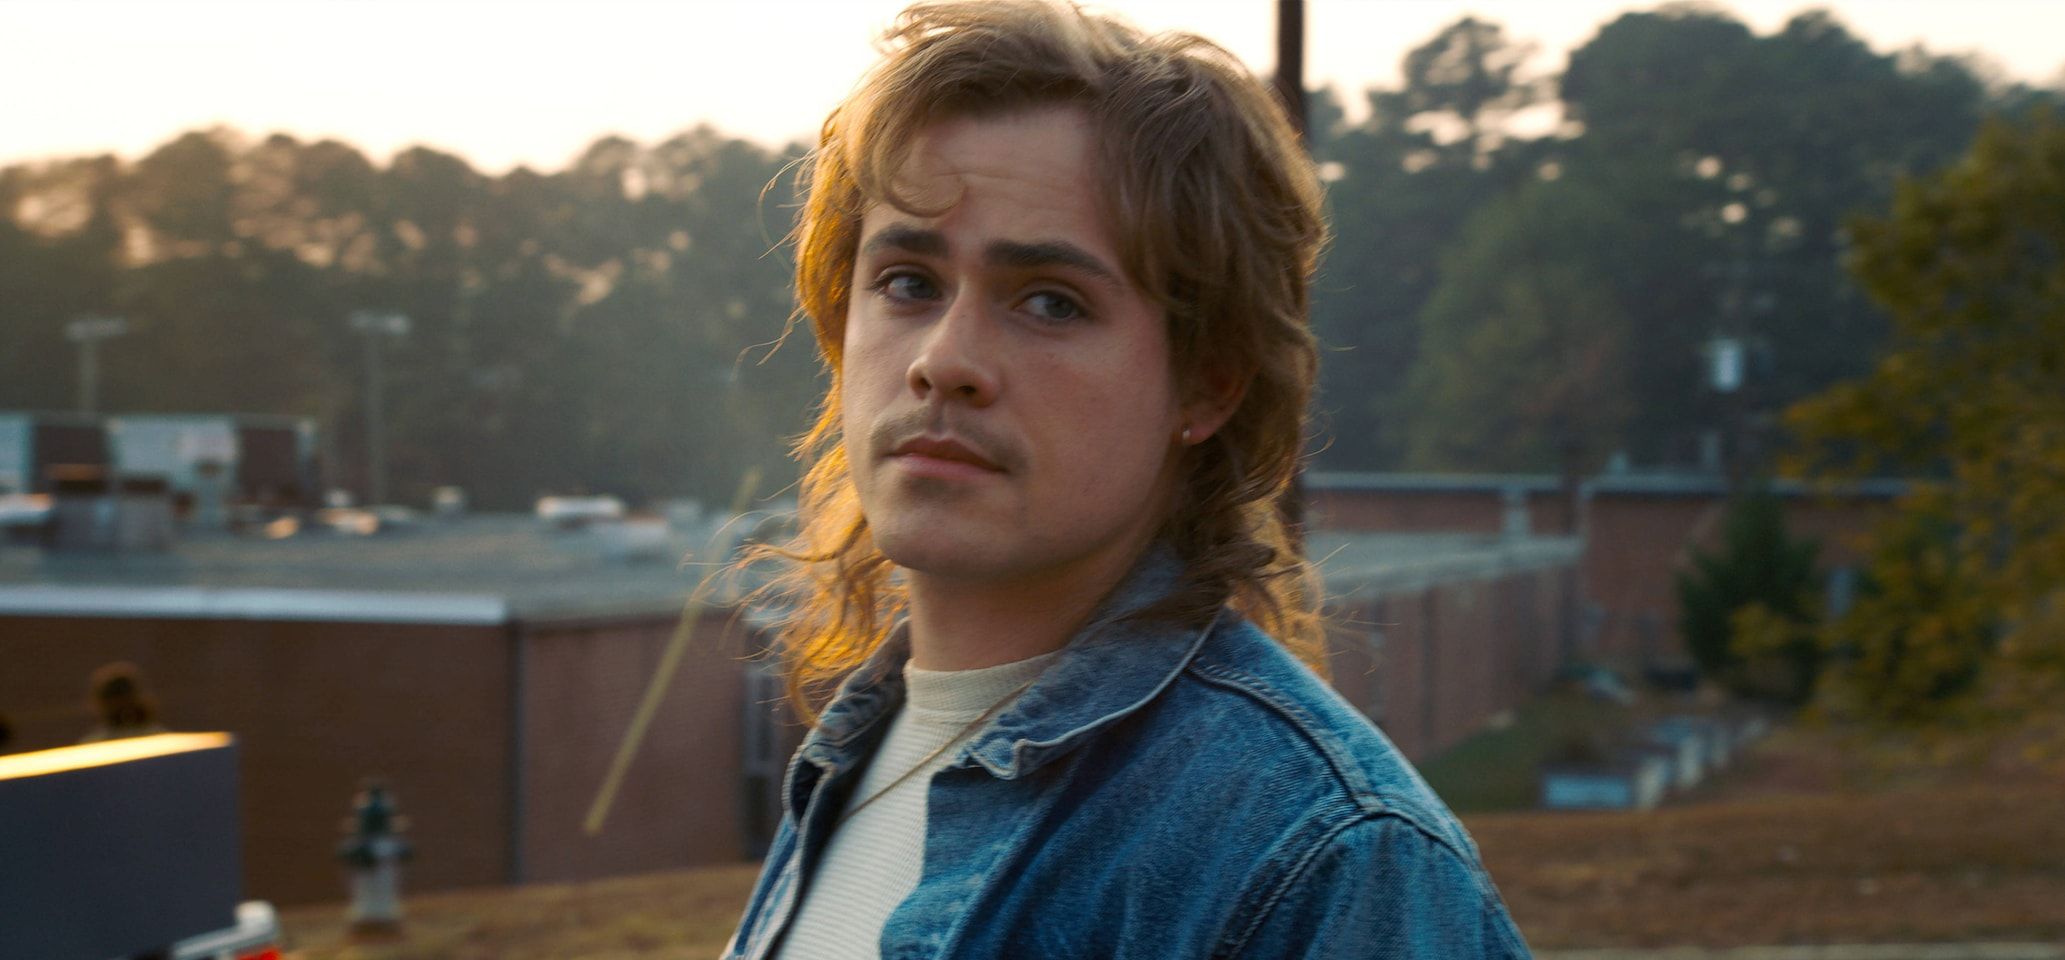 STRANGER THINGS, Dacre Montgomery in Chapter One: MADMAX (Season 2, Episode 1, aired October 27, 2017). Netflix/courtesy